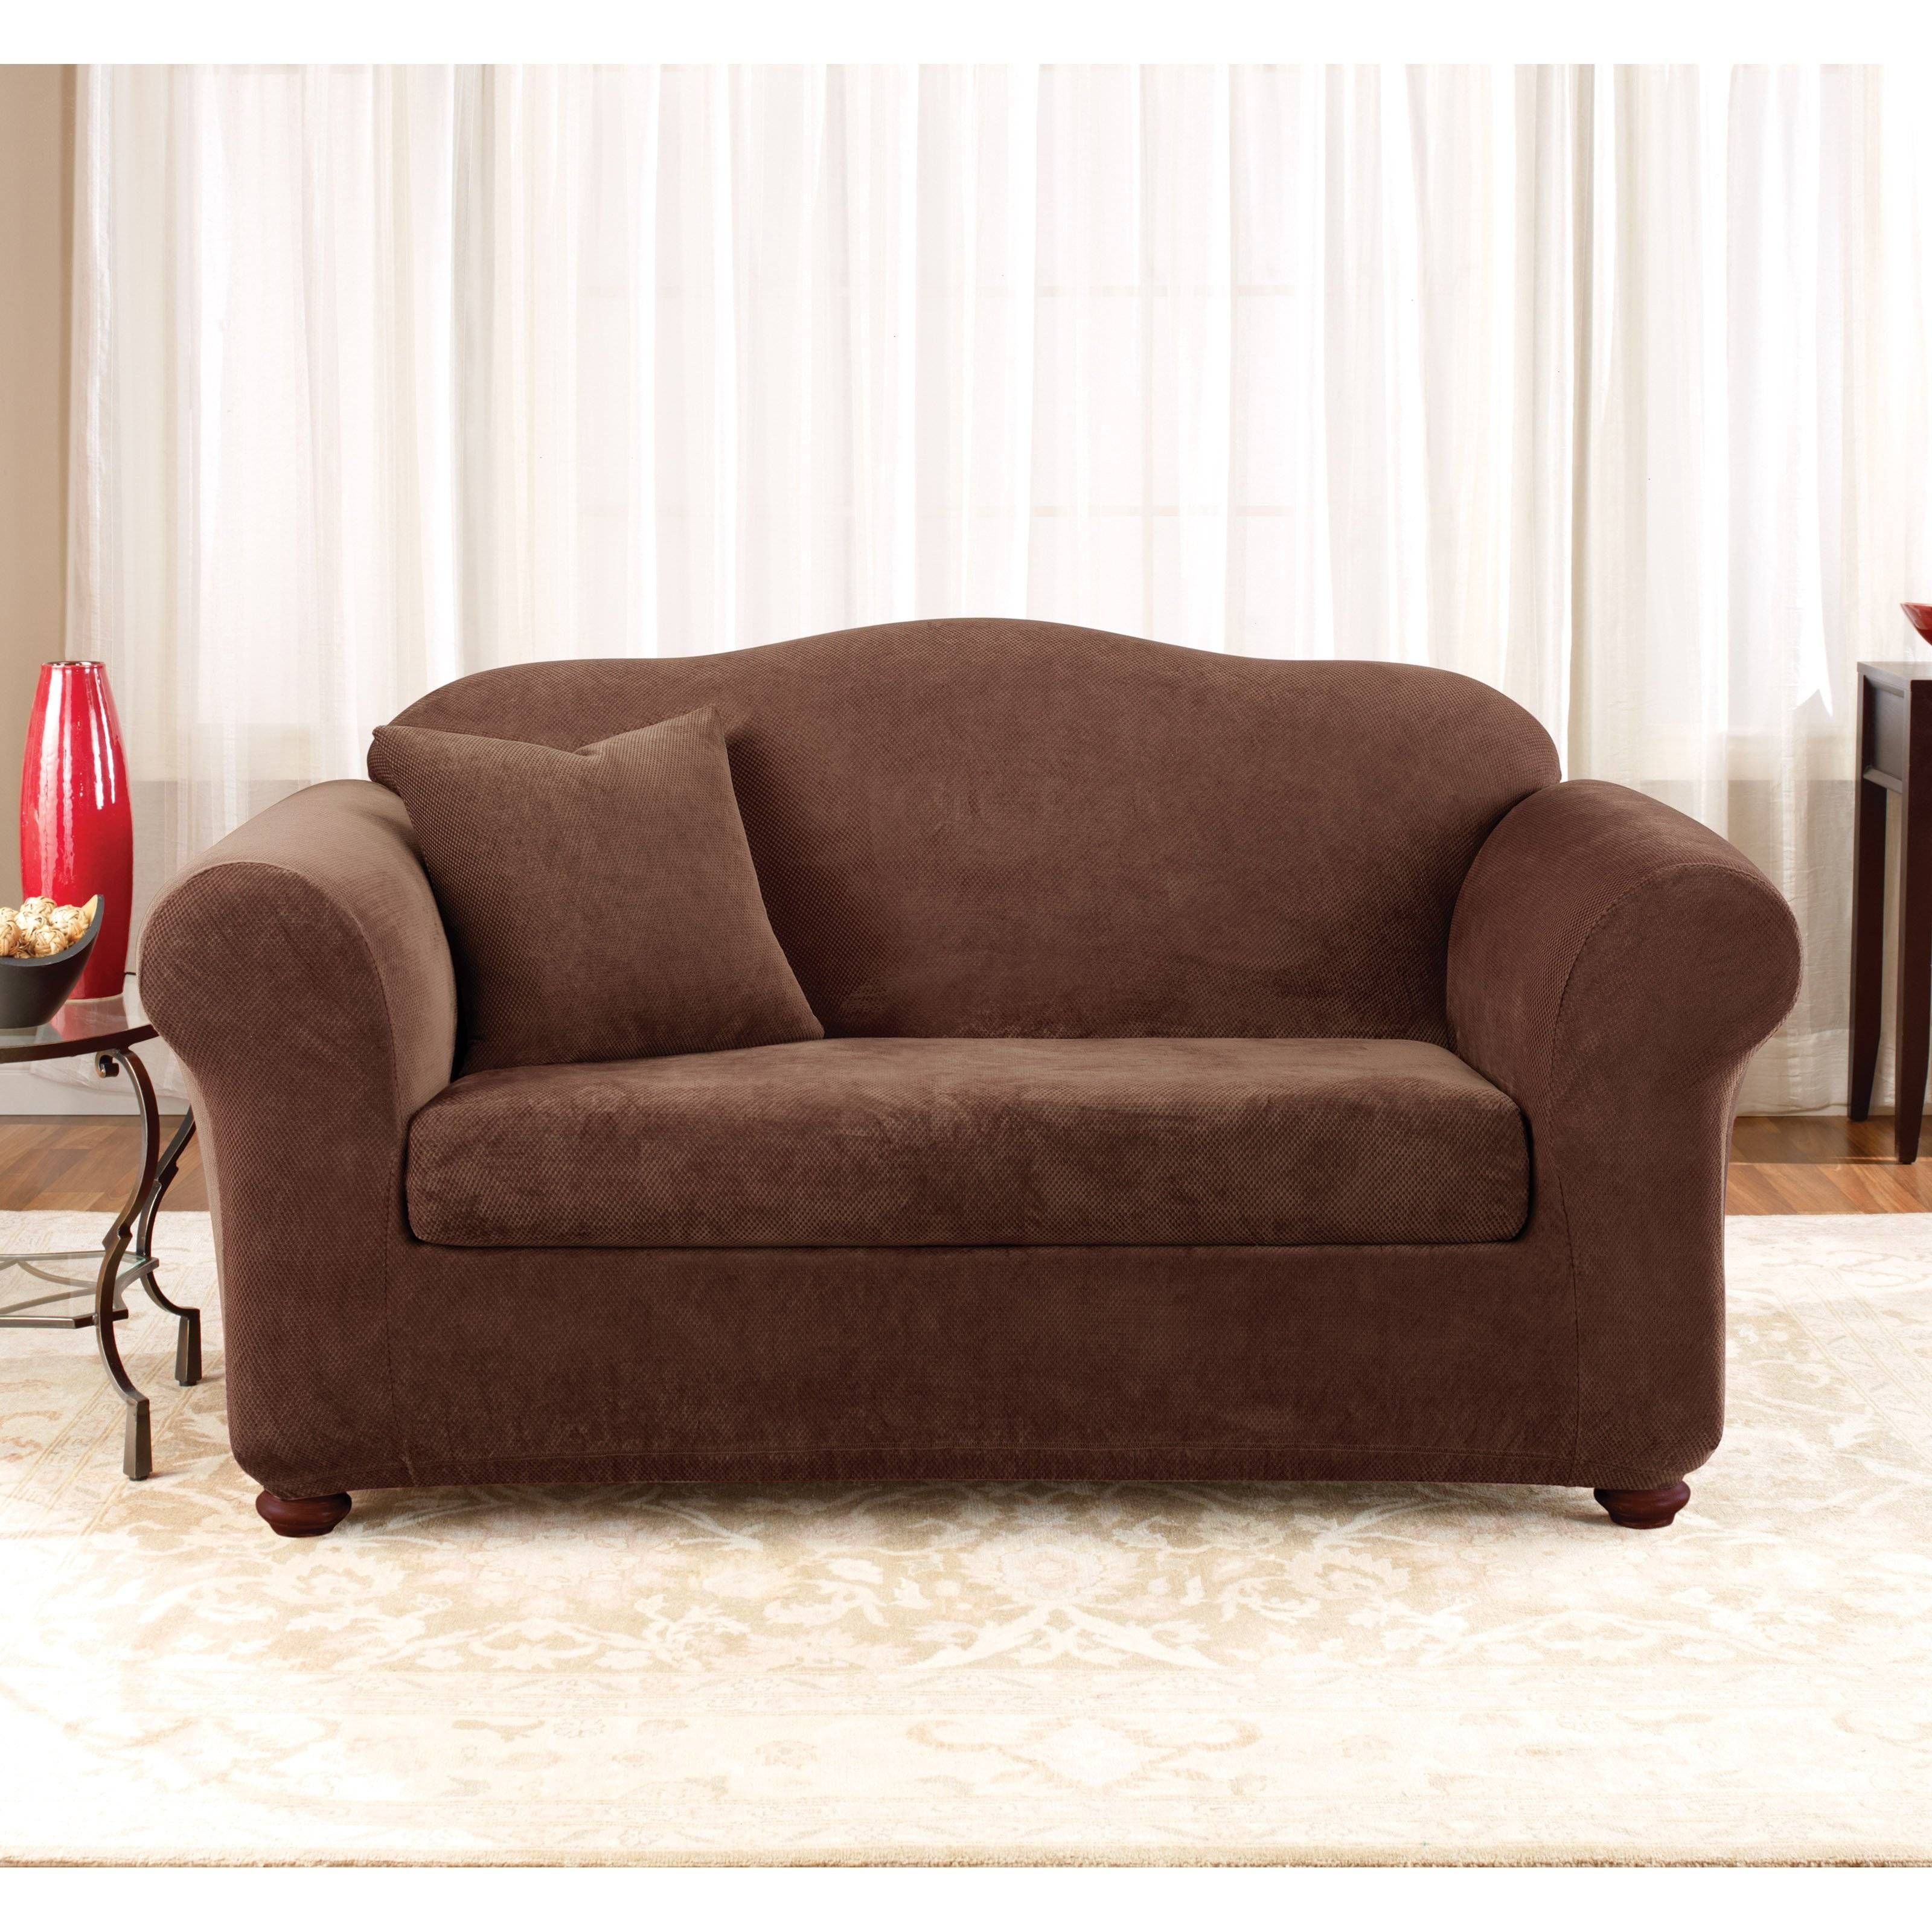 Sure Fit Stretch Pique T Cushion Three Piece Sofa Slipcover Within Stretch Slipcovers For Sofas (View 7 of 15)